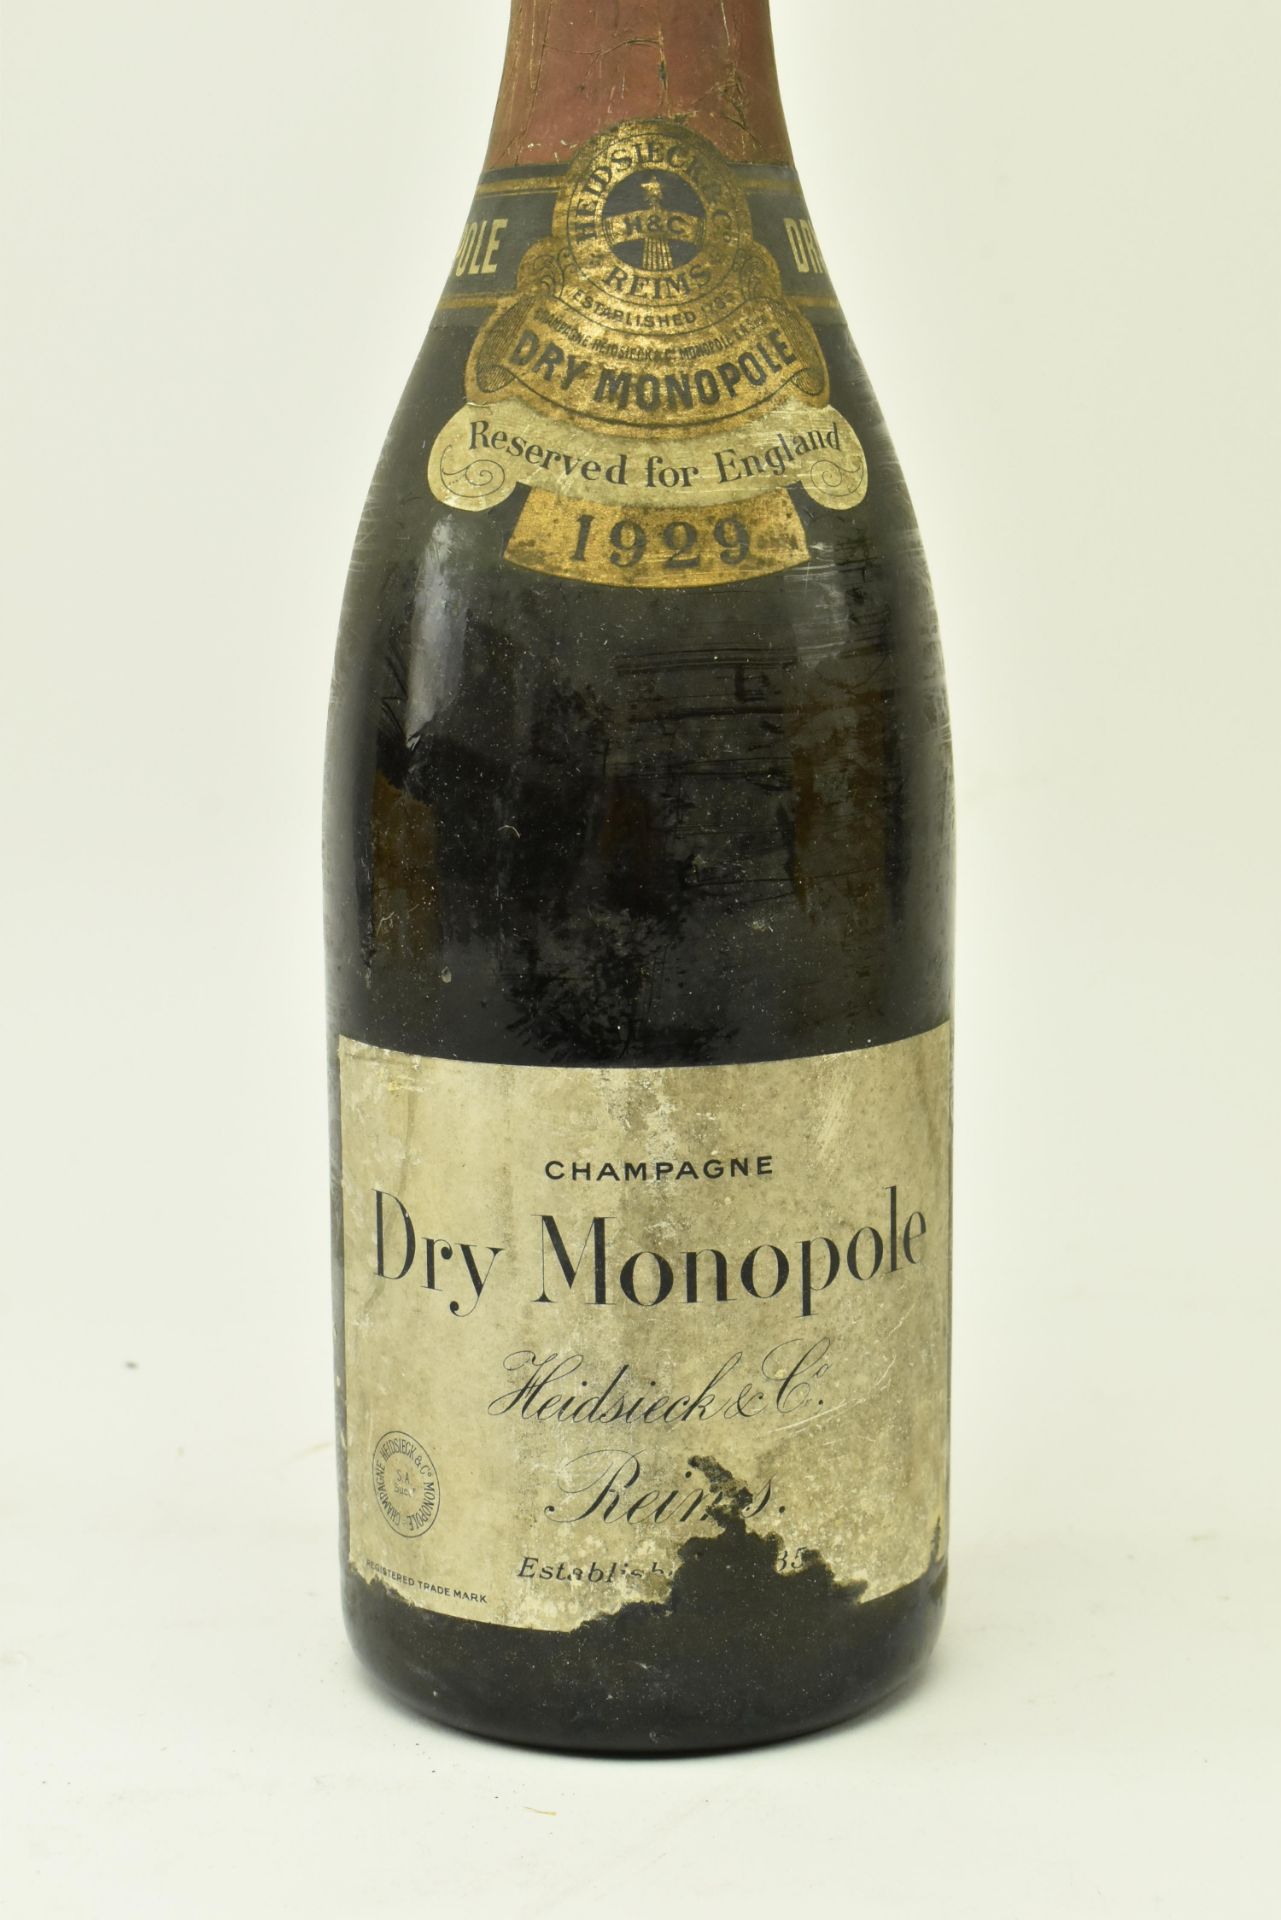 HEIDSIECK & CO REIMS - 1929 DRY MONOPOLE CHAMPAGNE BOTTLE - Image 4 of 6